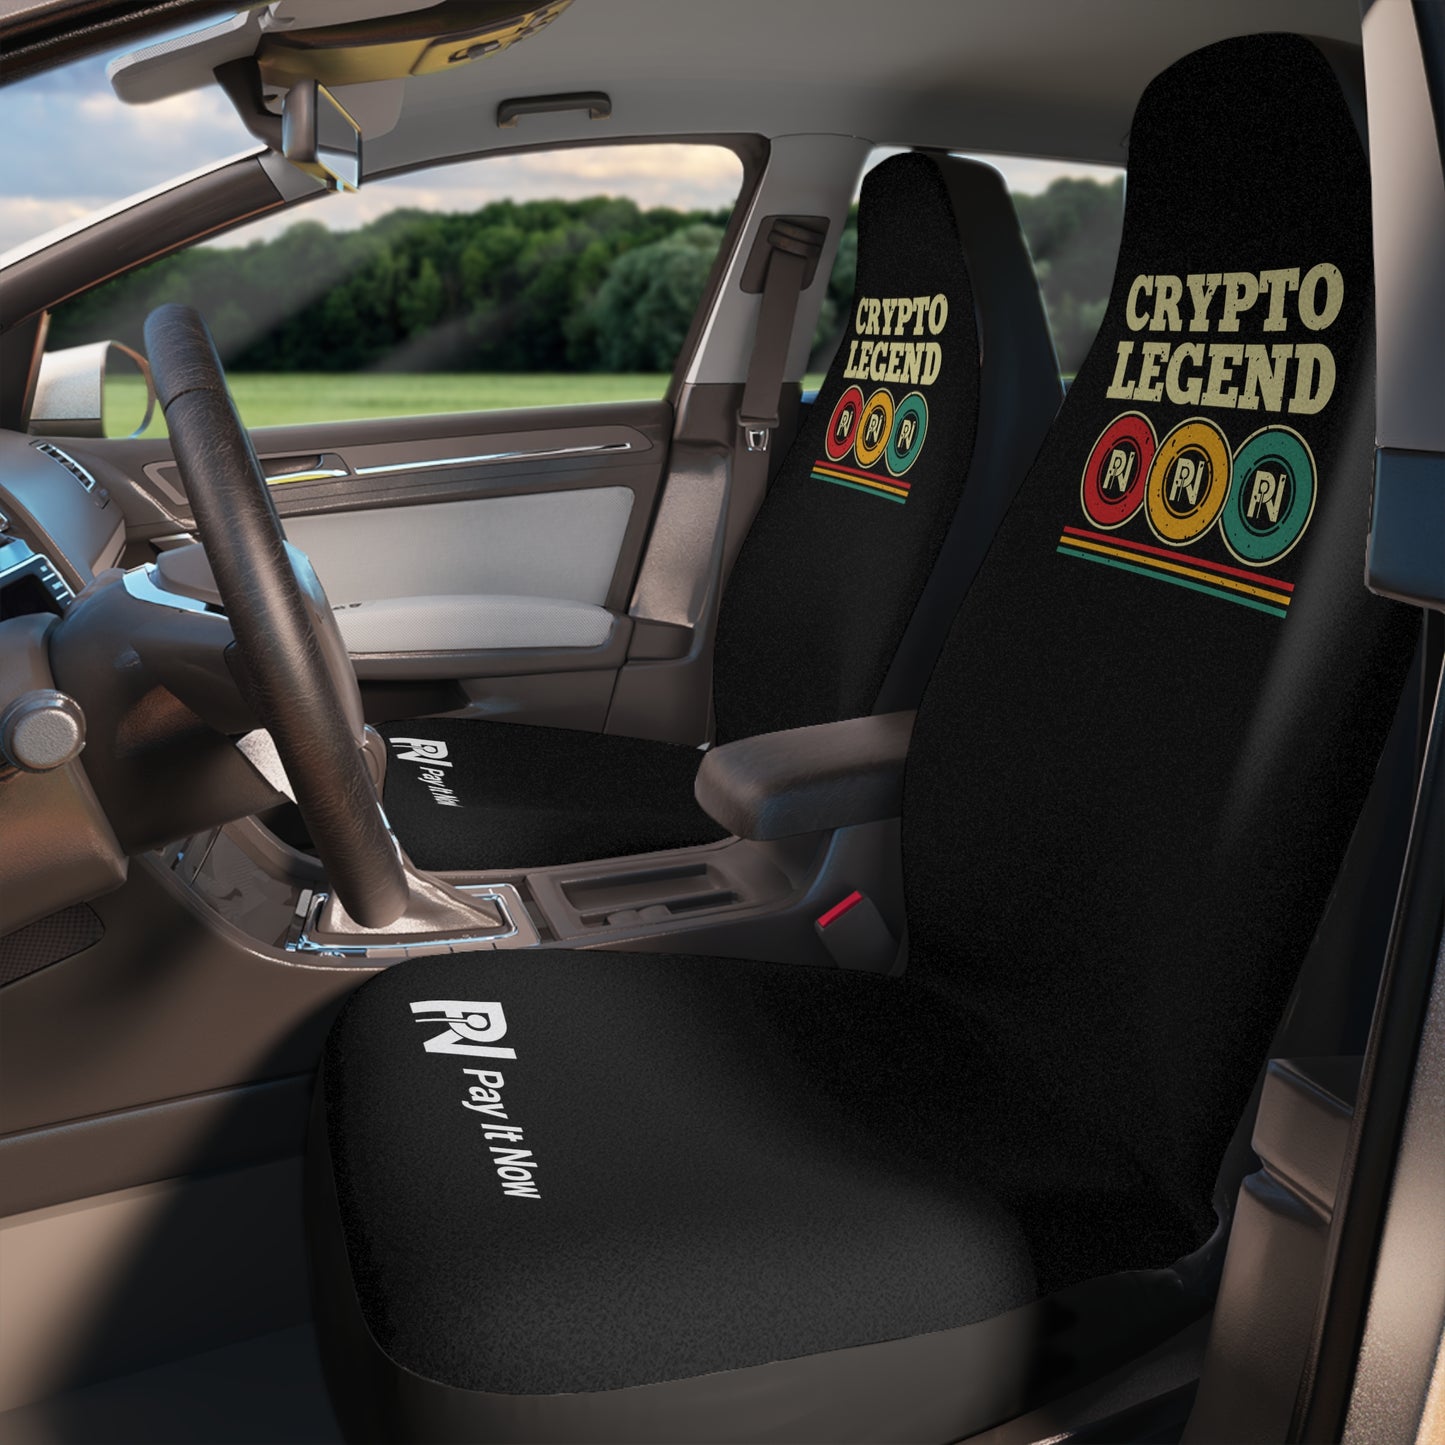 Car Seat Covers (Crypto Legend)